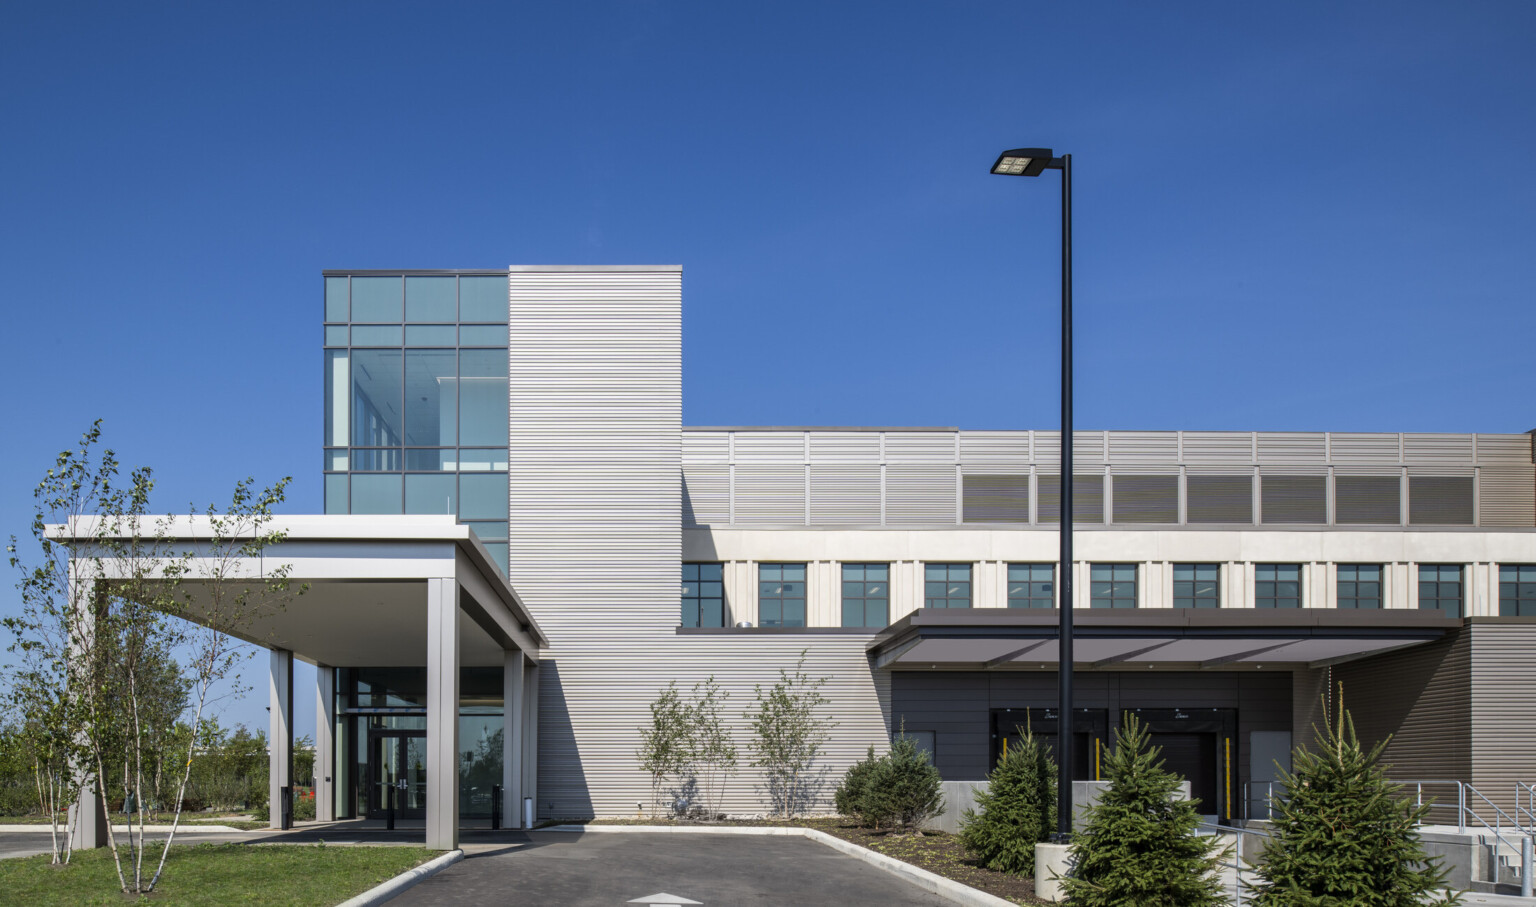 Exterior of outpatient care facility entrance, grey steel cladding facade, double-height and floor-to-ceiling windows brings sunlight indoors, parking lot and outdoor lighting, overhang at entrance protects folks from inclement weather